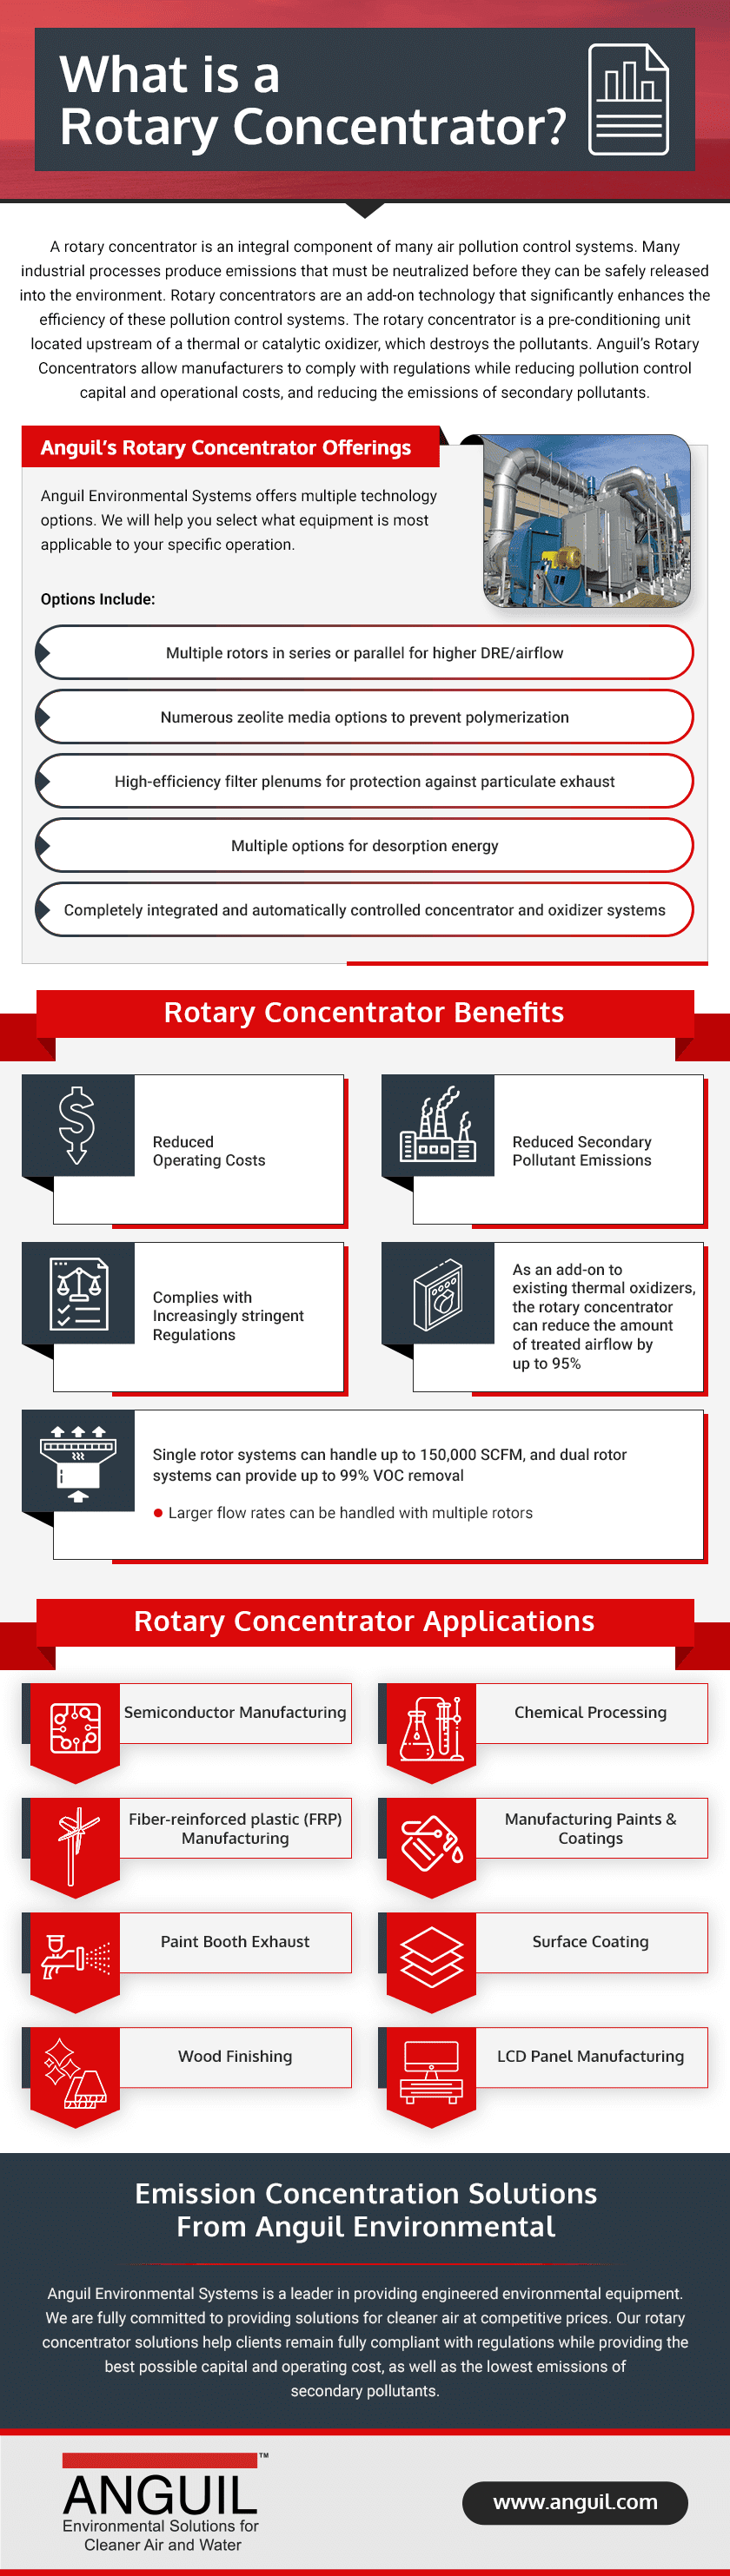 What Is a Rotary Concentrator?